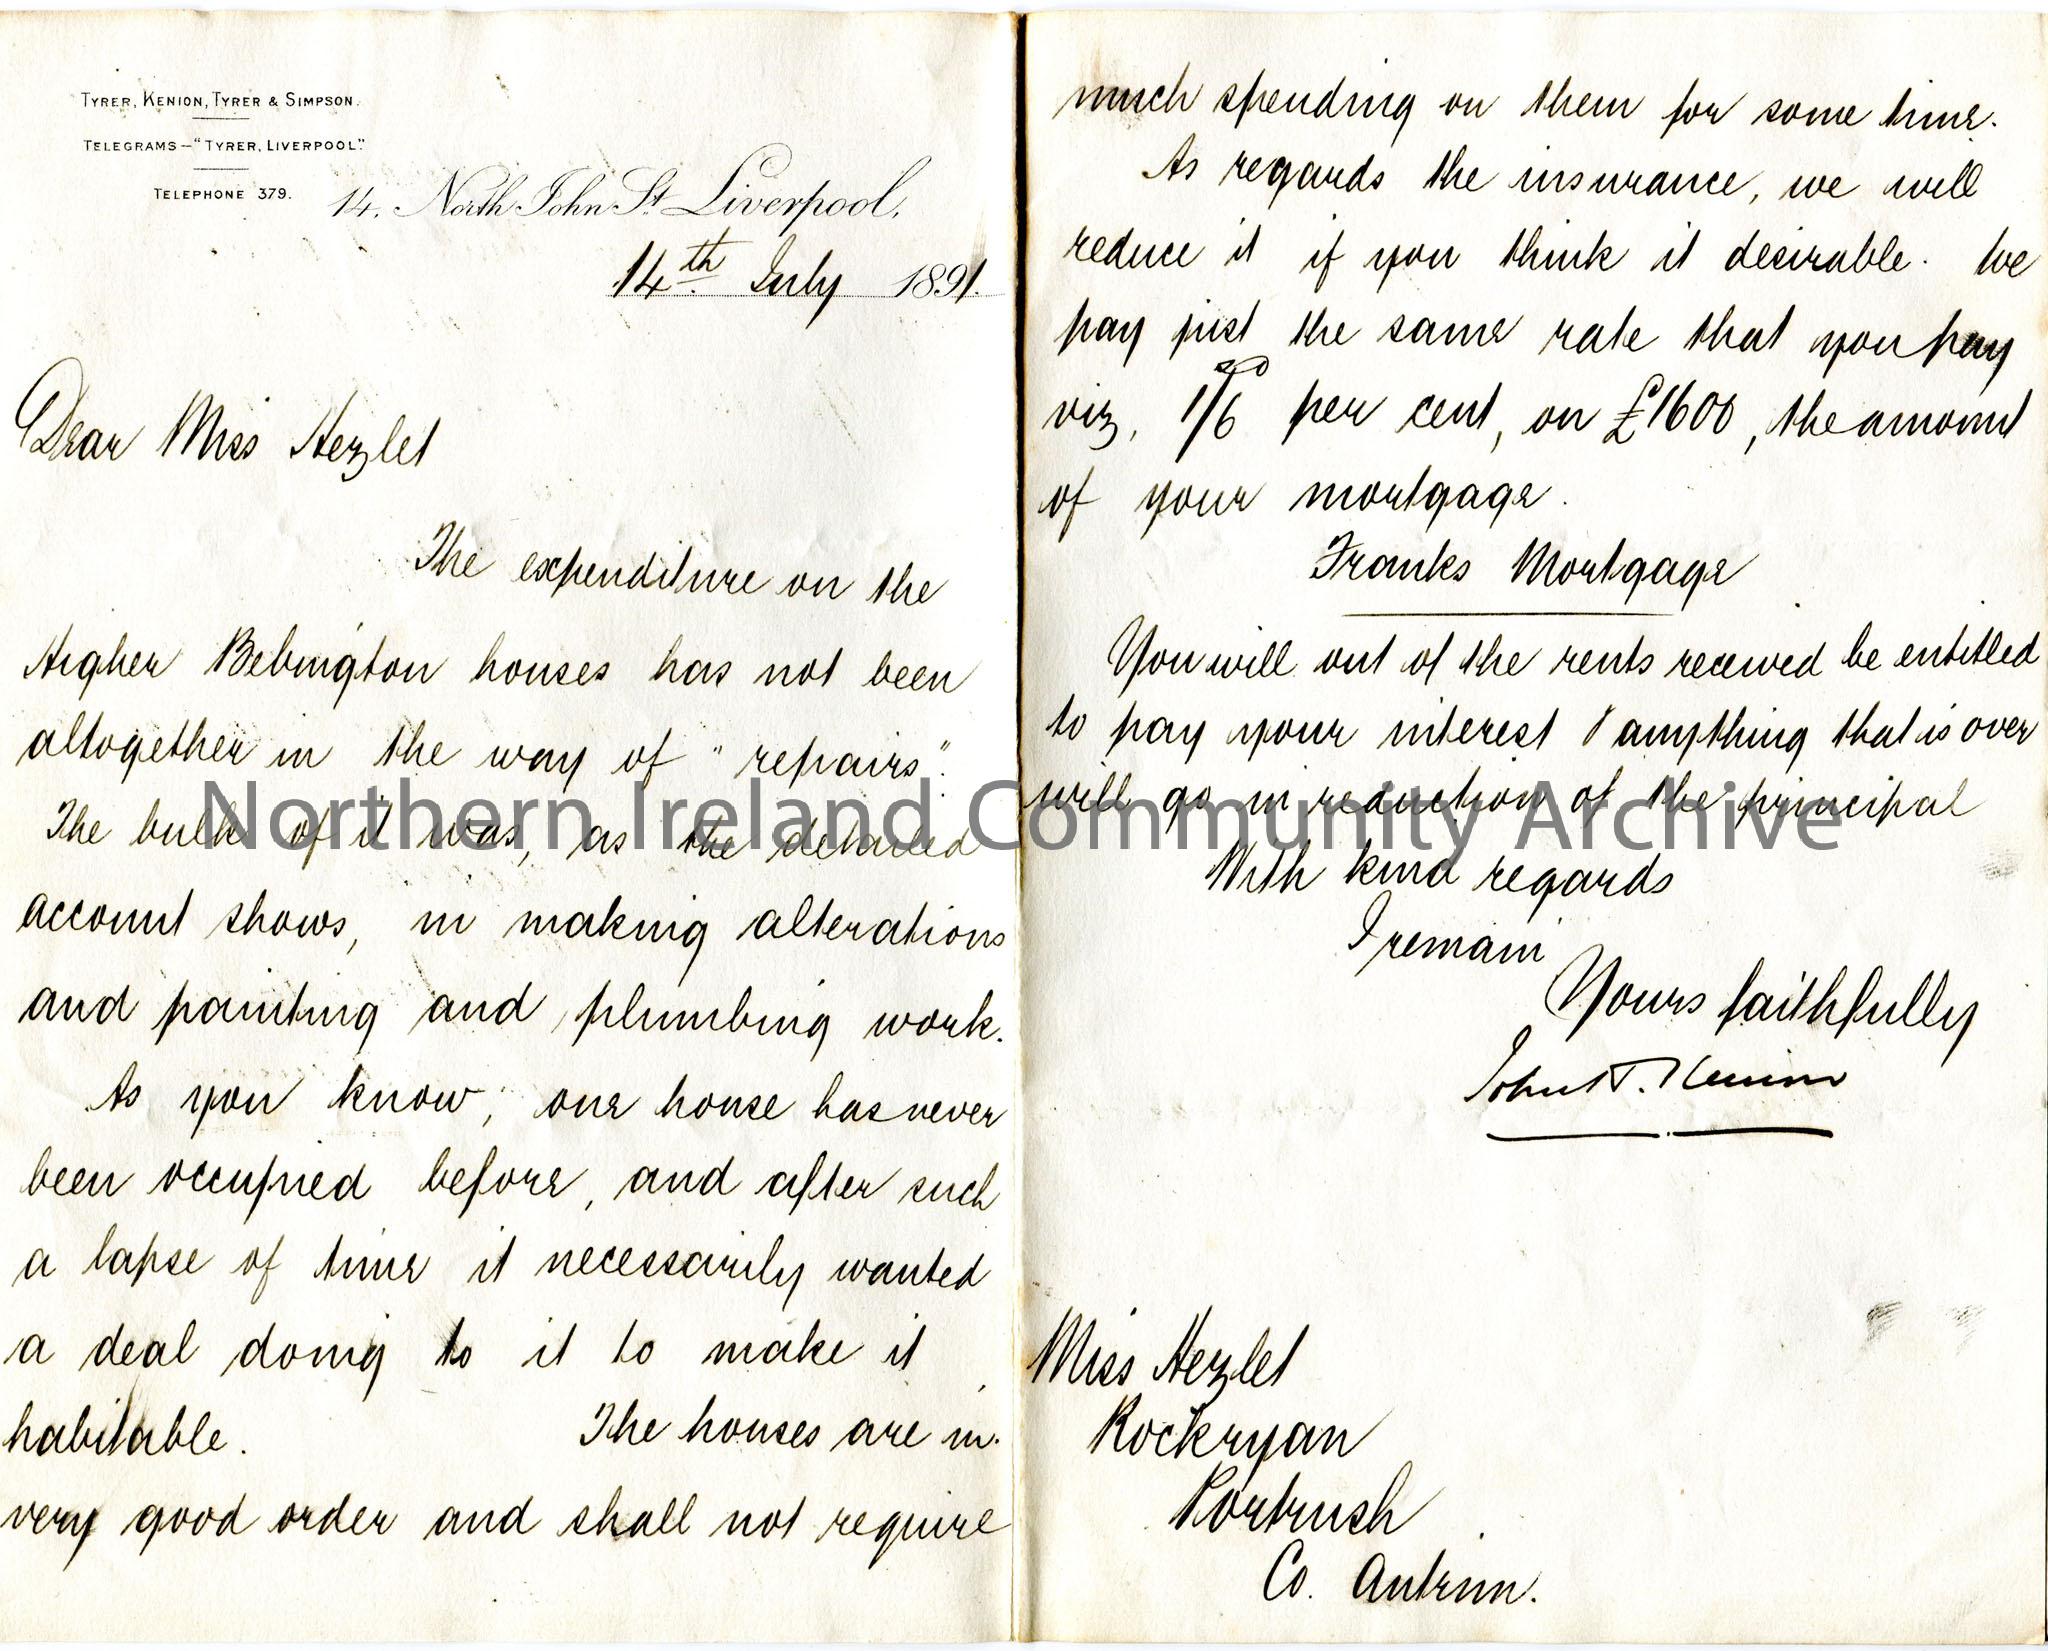 Handwritten letter to Miss Hezlet at Rock Ryan, Portrush, Co.Antrim. Writing re expenditures for alterations, painting and plumbing work and insurance…